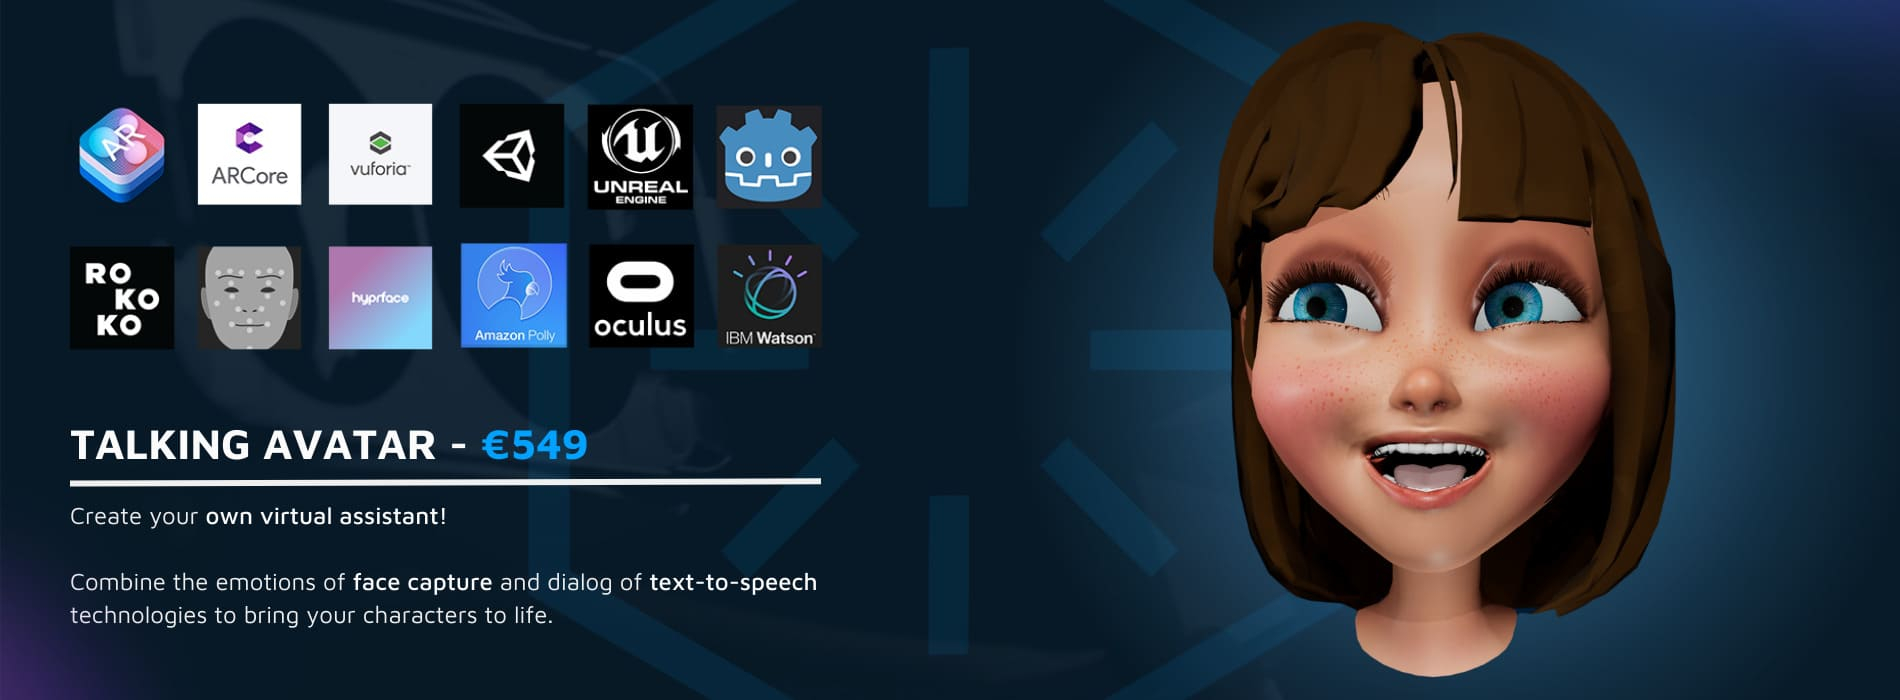 3D model of a cartoonish girl laughing and promoting a talking avatar service